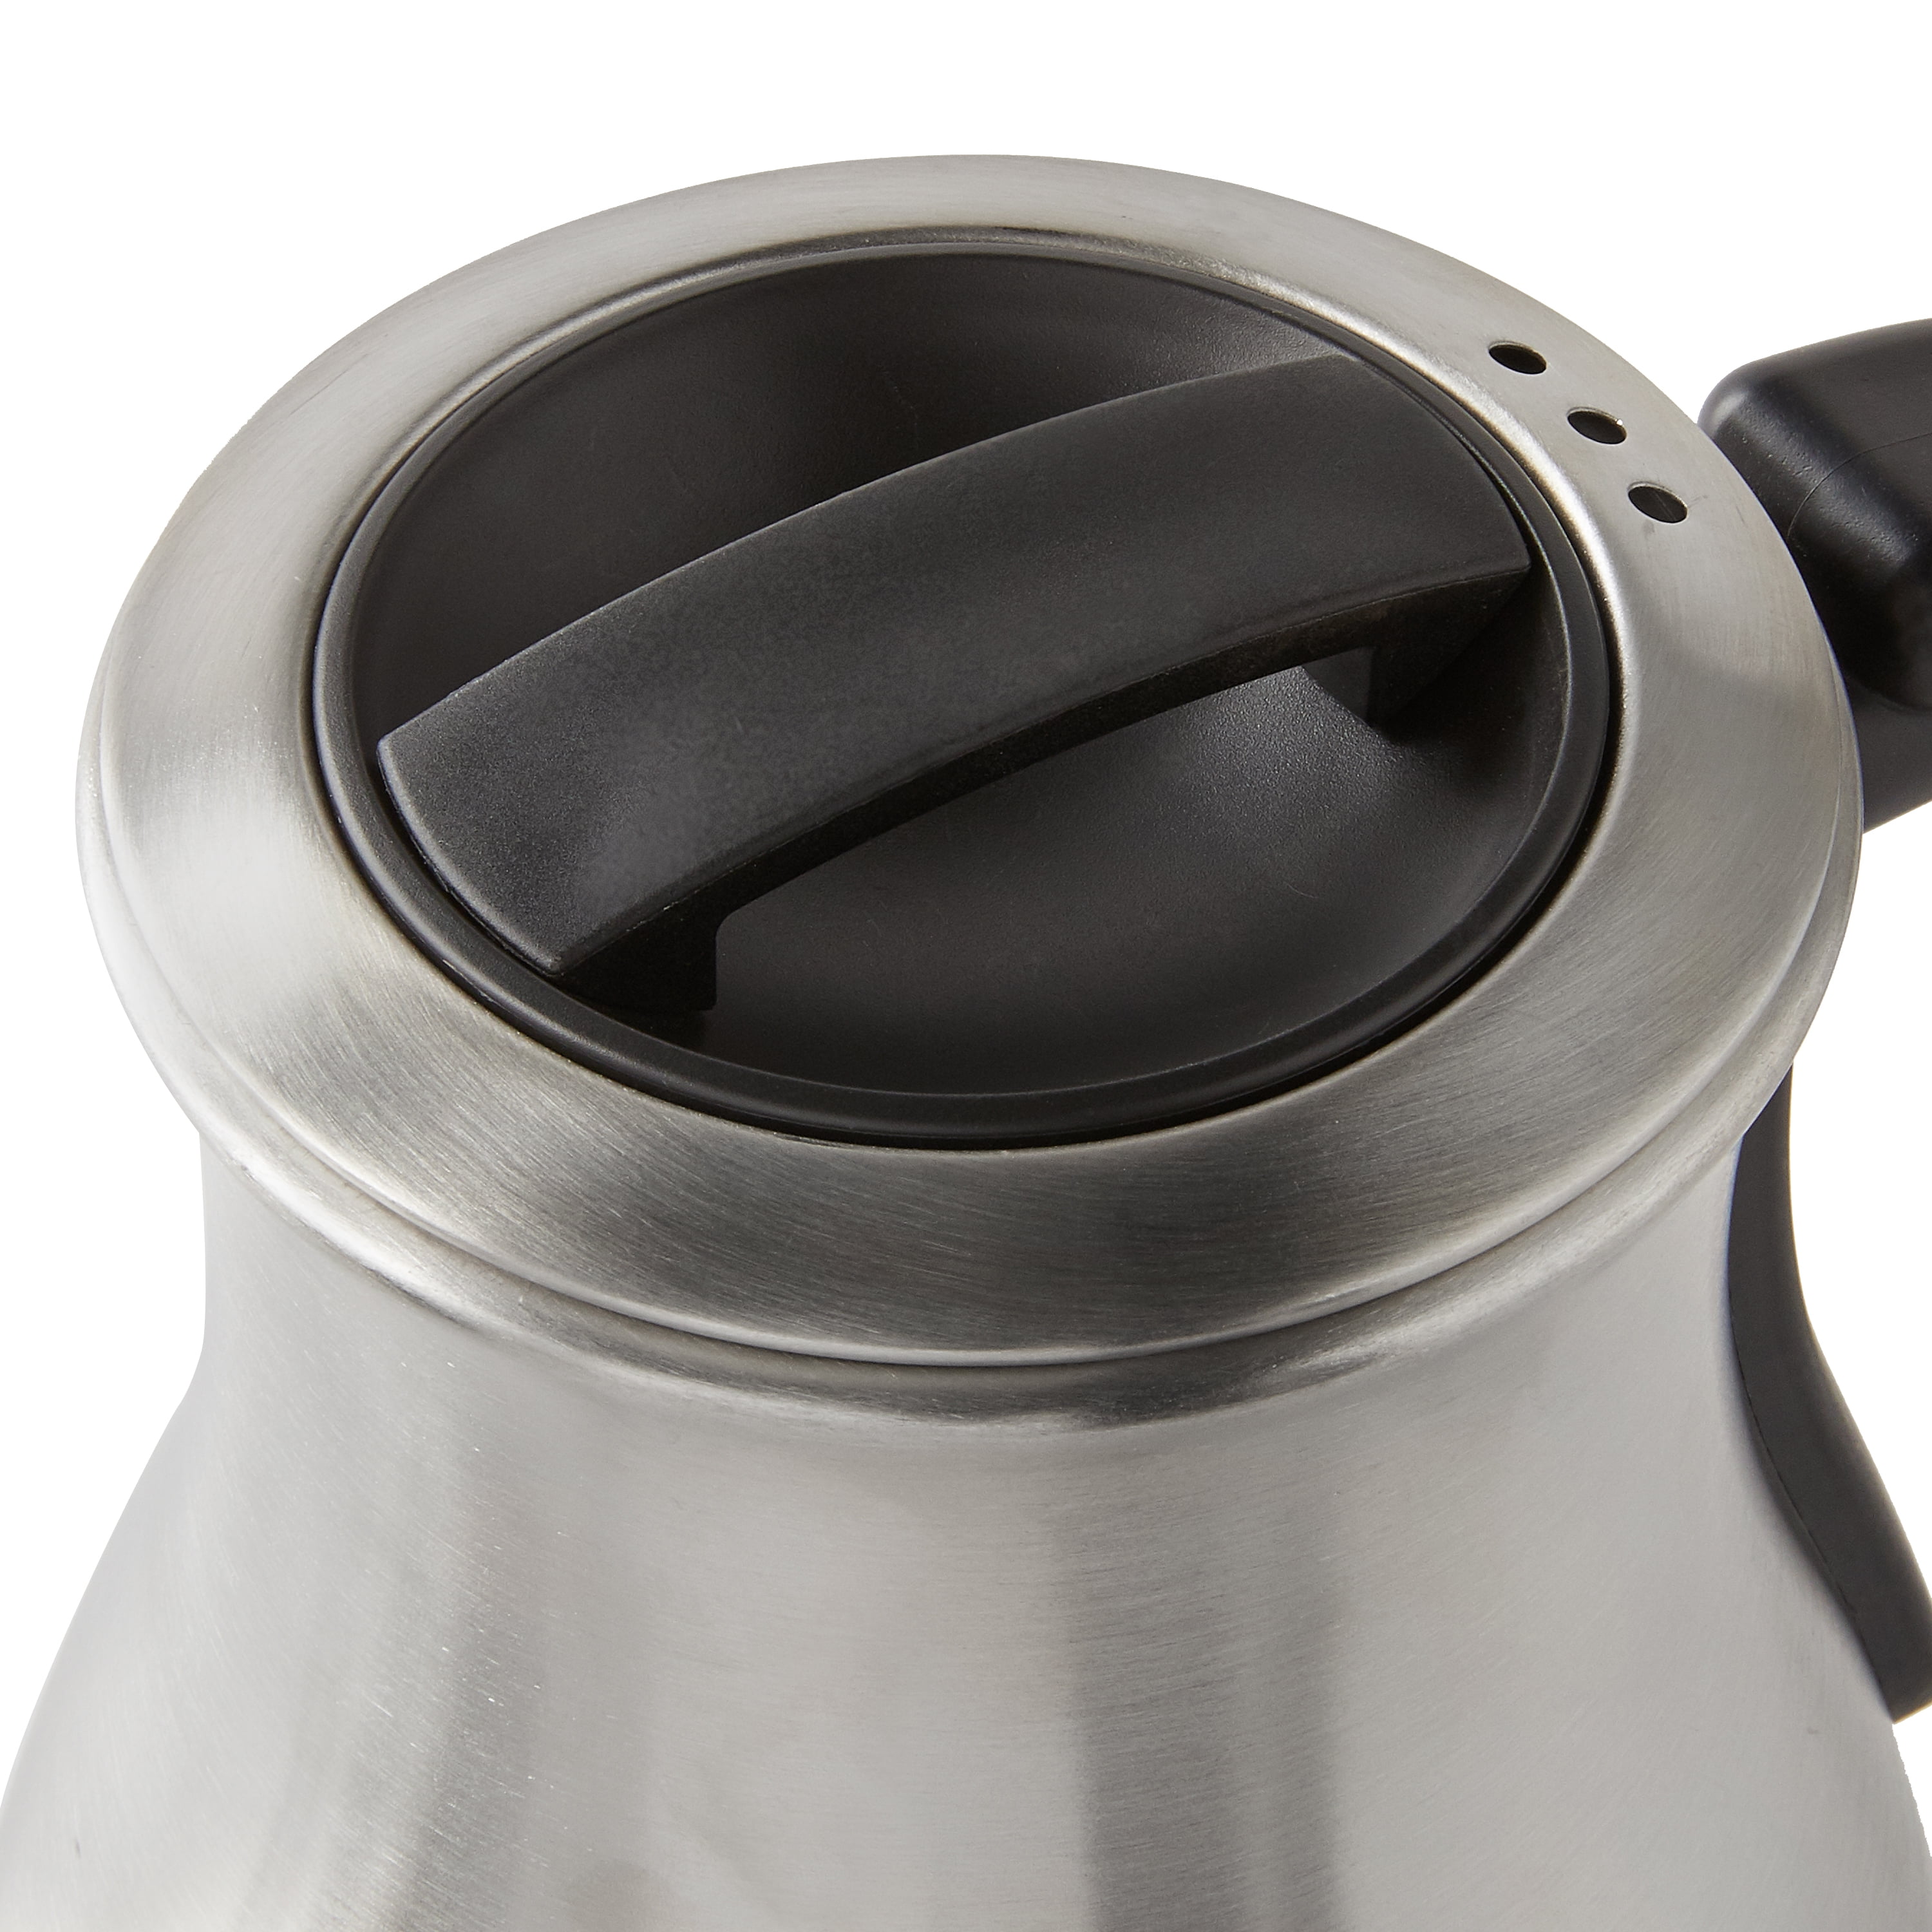 Chef's Choice 1 Quart Stainless Steel Cordless Electric Tea Kettle - Black